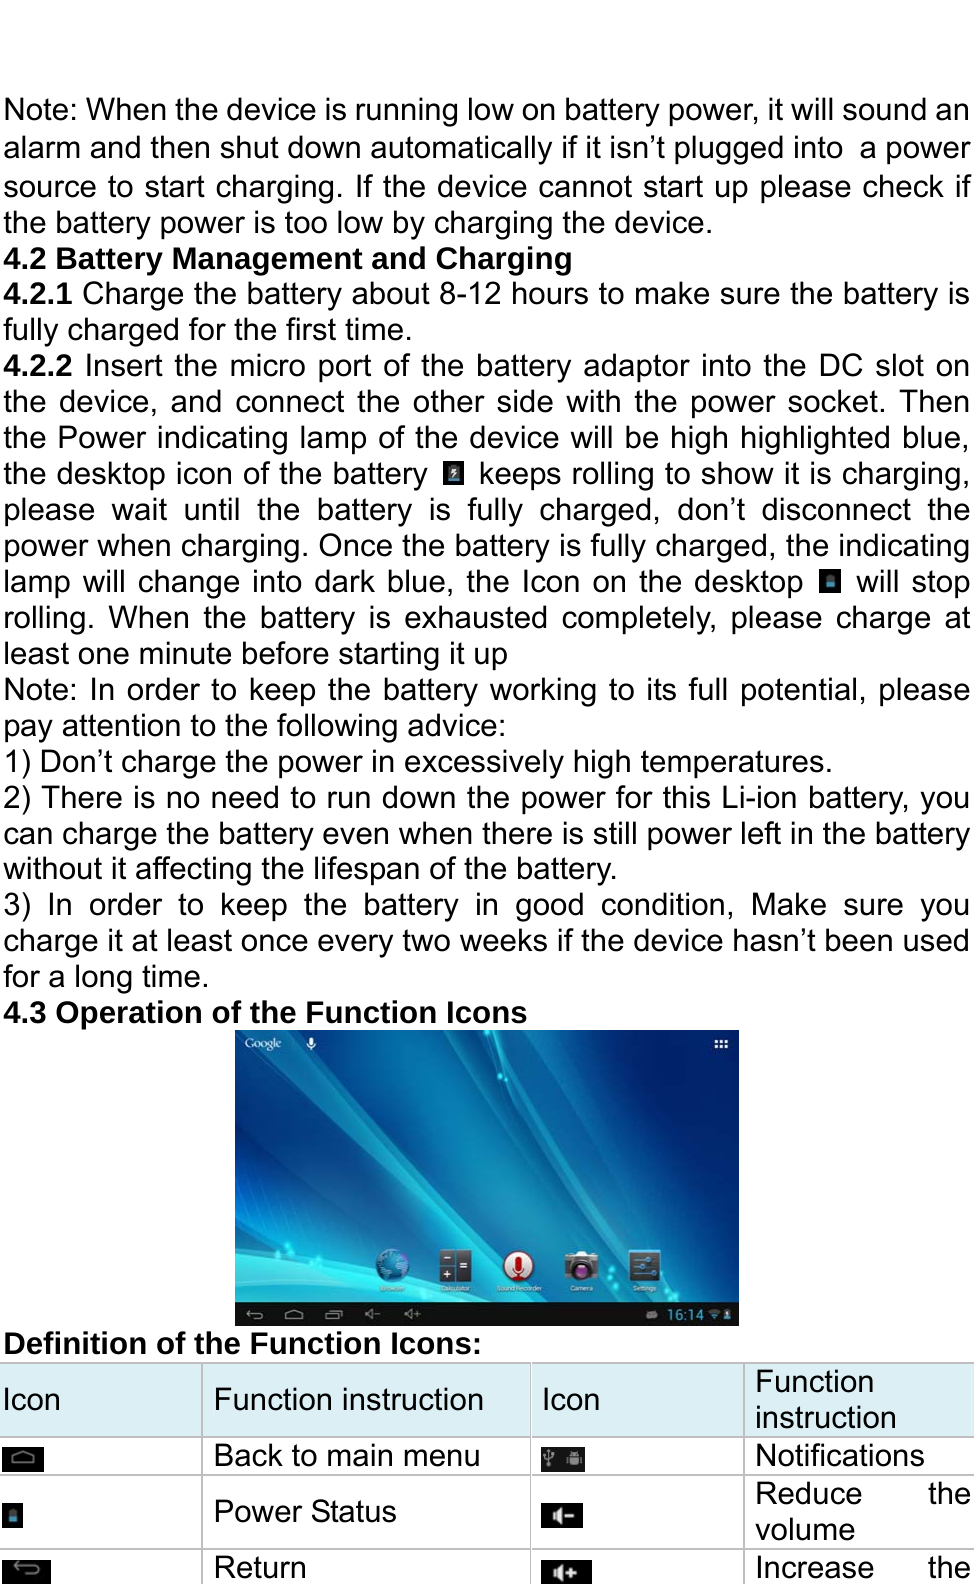   Note: When the device is running low on battery power, it will sound an alarm and then shut down automatically if it isn’t plugged into a power source to start charging. If the device cannot start up please check if the battery power is too low by charging the device. 4.2 Battery Management and Charging 4.2.1 Charge the battery about 8-12 hours to make sure the battery is fully charged for the first time. 4.2.2 Insert the micro port of the battery adaptor into the DC slot on the device, and connect the other side with the power socket. Then the Power indicating lamp of the device will be high highlighted blue, the desktop icon of the battery    keeps rolling to show it is charging, please wait until the battery is fully charged, don’t disconnect the power when charging. Once the battery is fully charged, the indicating lamp will change into dark blue, the Icon on the desktop   will stop rolling. When the battery is exhausted completely, please charge at least one minute before starting it up Note: In order to keep the battery working to its full potential, please pay attention to the following advice:   1) Don’t charge the power in excessively high temperatures.   2) There is no need to run down the power for this Li-ion battery, you can charge the battery even when there is still power left in the battery without it affecting the lifespan of the battery.   3) In order to keep the battery in good condition, Make sure you charge it at least once every two weeks if the device hasn’t been used for a long time.   4.3 Operation of the Function Icons    Definition of the Function Icons: Icon  Function instruction  Icon  Function instruction  Back to main menu   Notifications  Power Status   Reduce the volume  Return   Increase the 